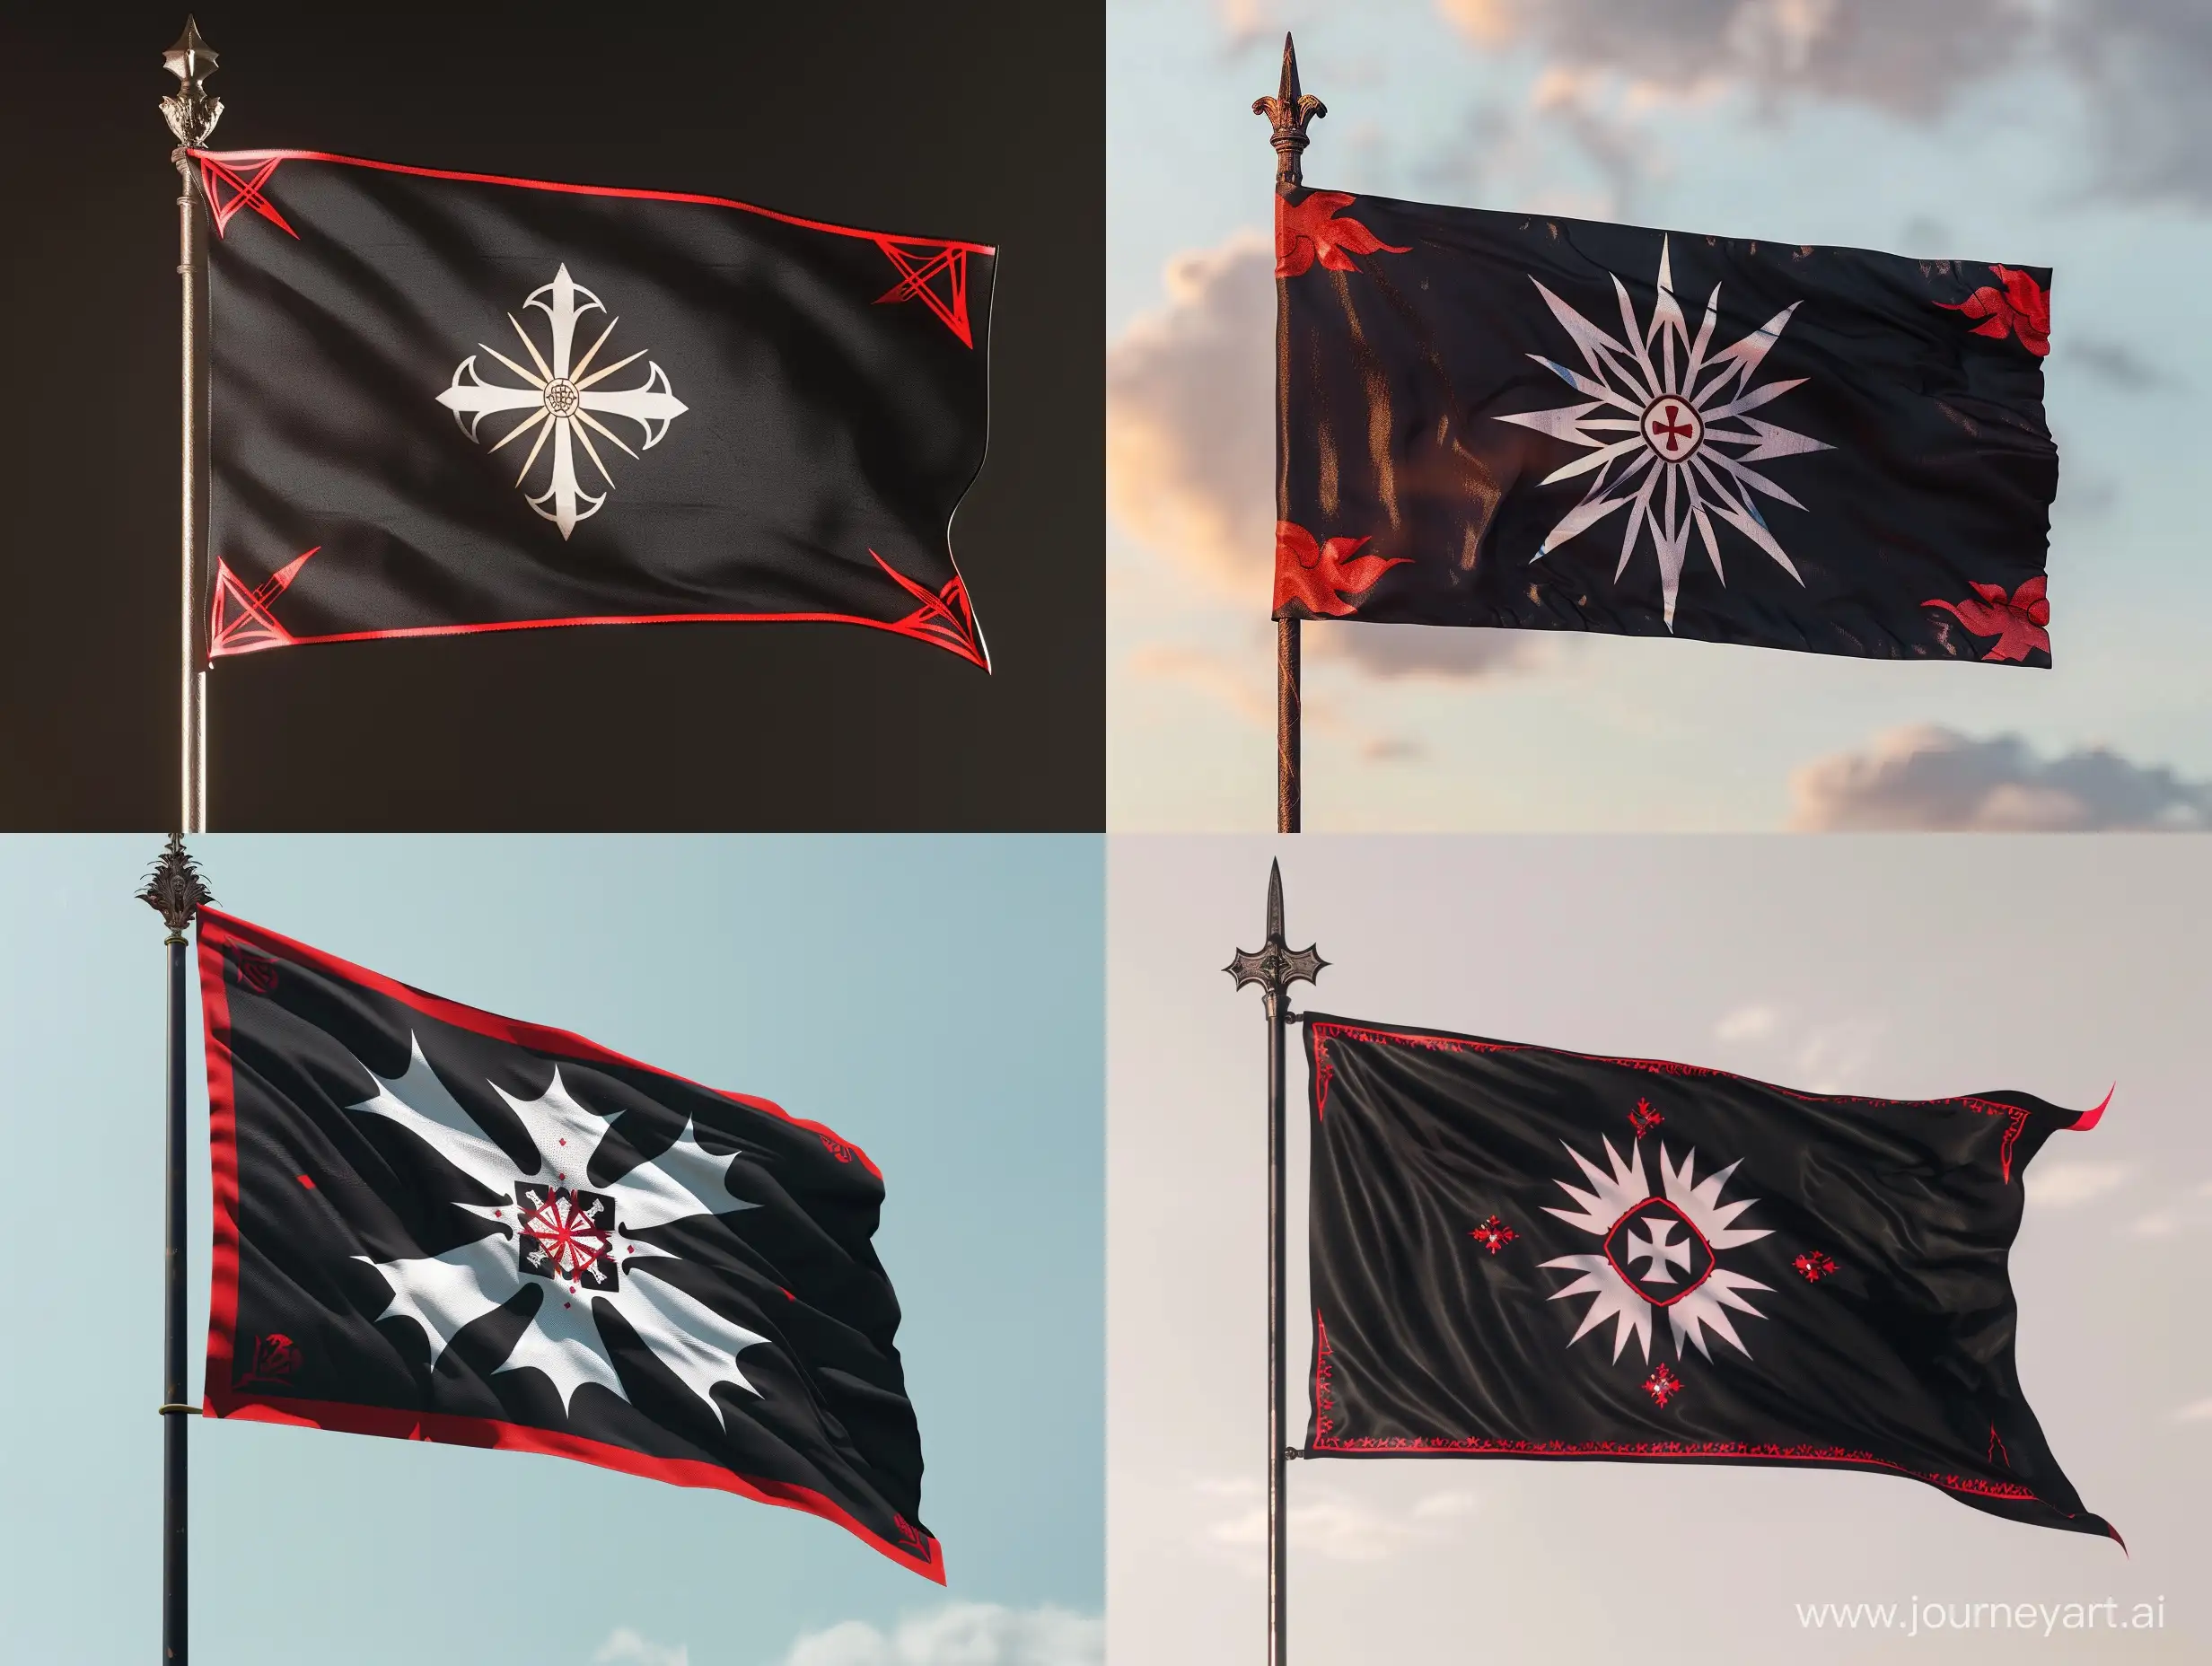 Order-of-the-Great-Light-Flag-Symbolic-Black-Banner-with-Red-Radiant-Corners-and-White-Cross